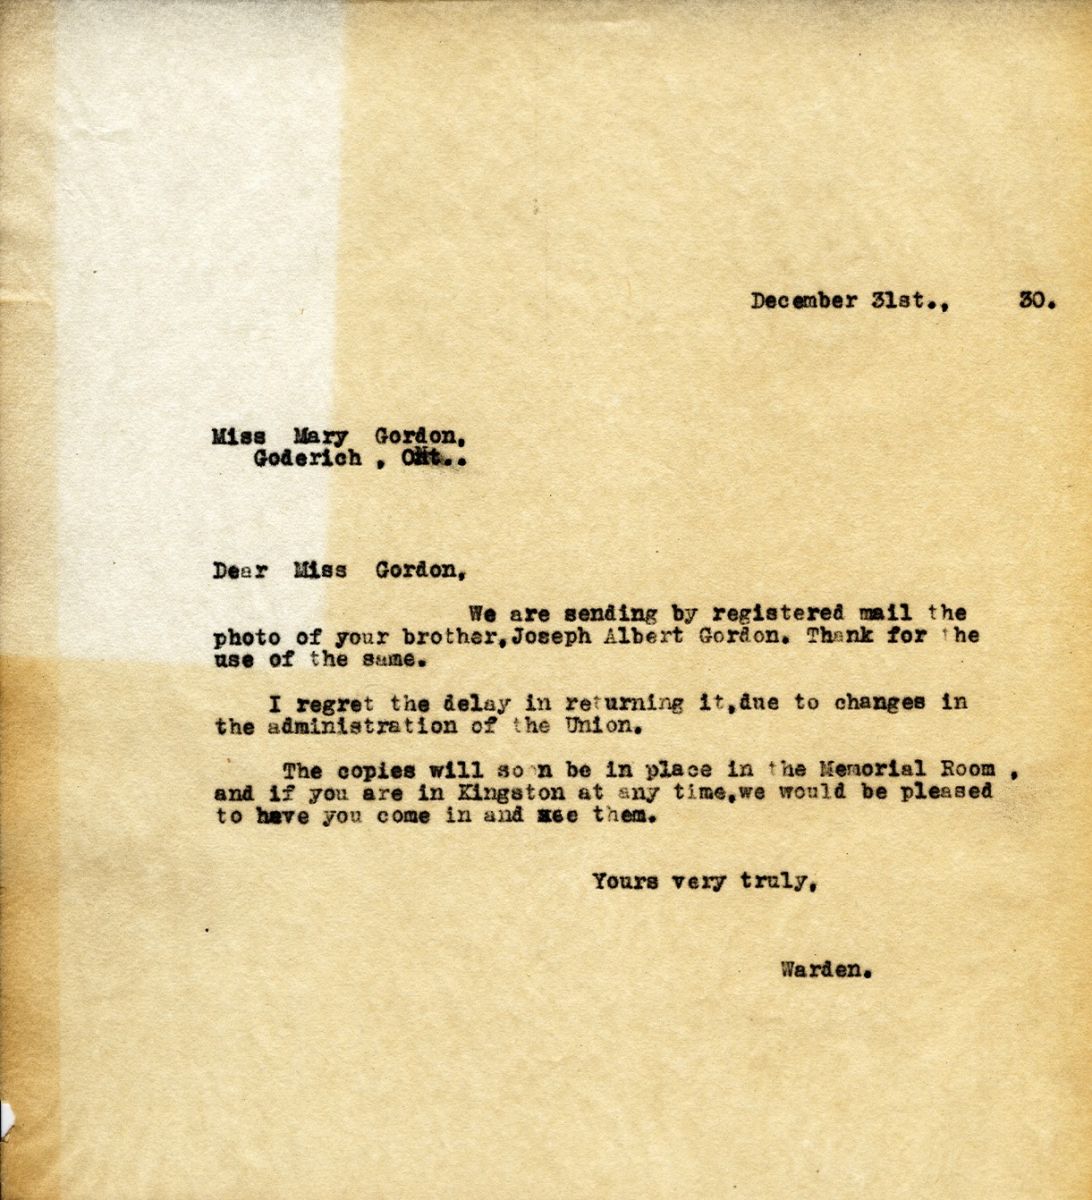 Letter from the Warden to Miss Mary Gordon, 31st December 1930